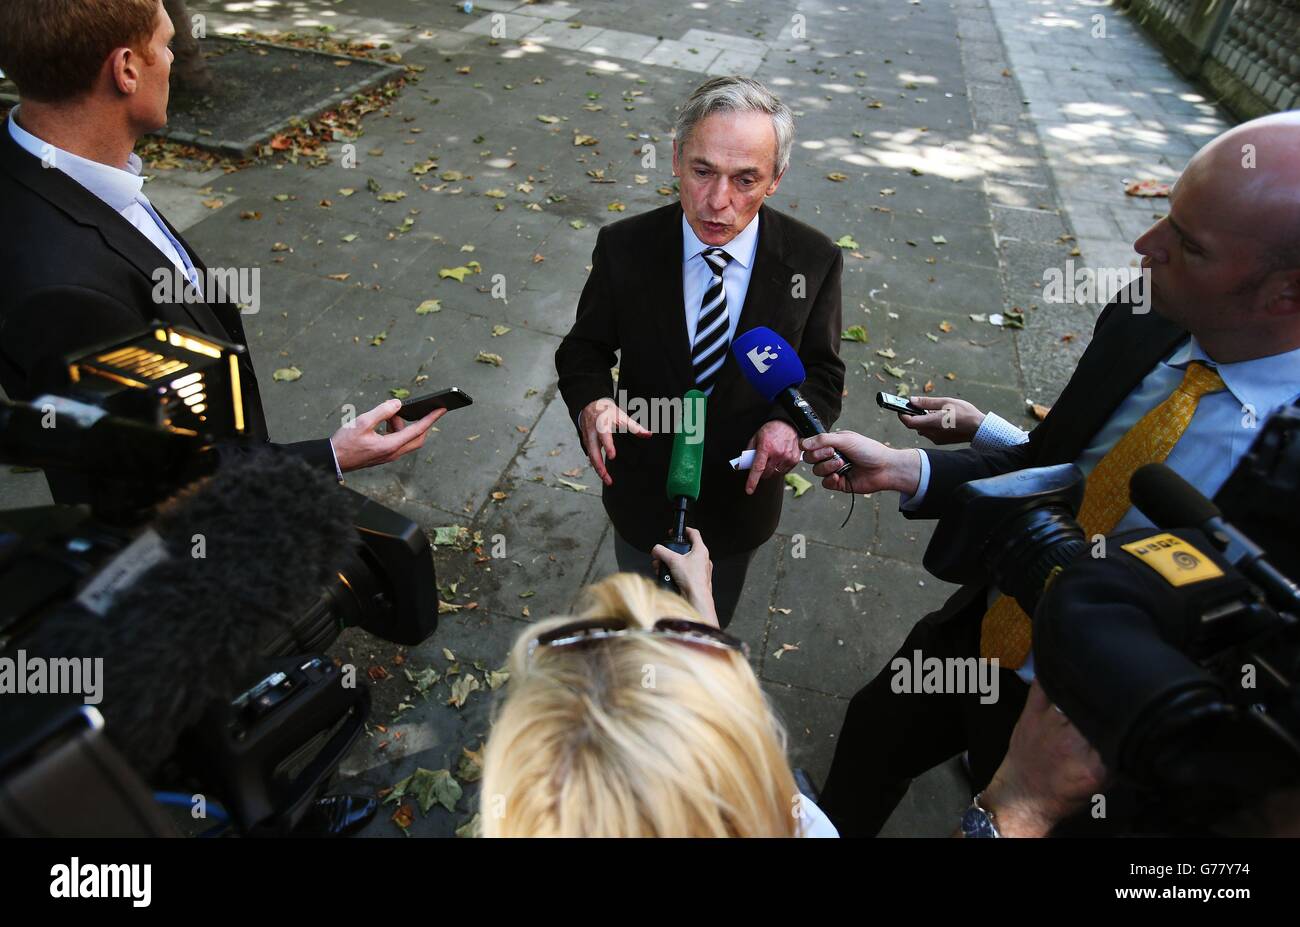 Jobs Minister Richard Bruton during a press briefing outside the Department of Jobs, Enterprise &amp; Innovation on Kildare Street, Dublin, where he defended luring companies to Ireland after US president Barack Obama accused multinationals of relocating to exploit unpatriotic tax loopholes. Stock Photo